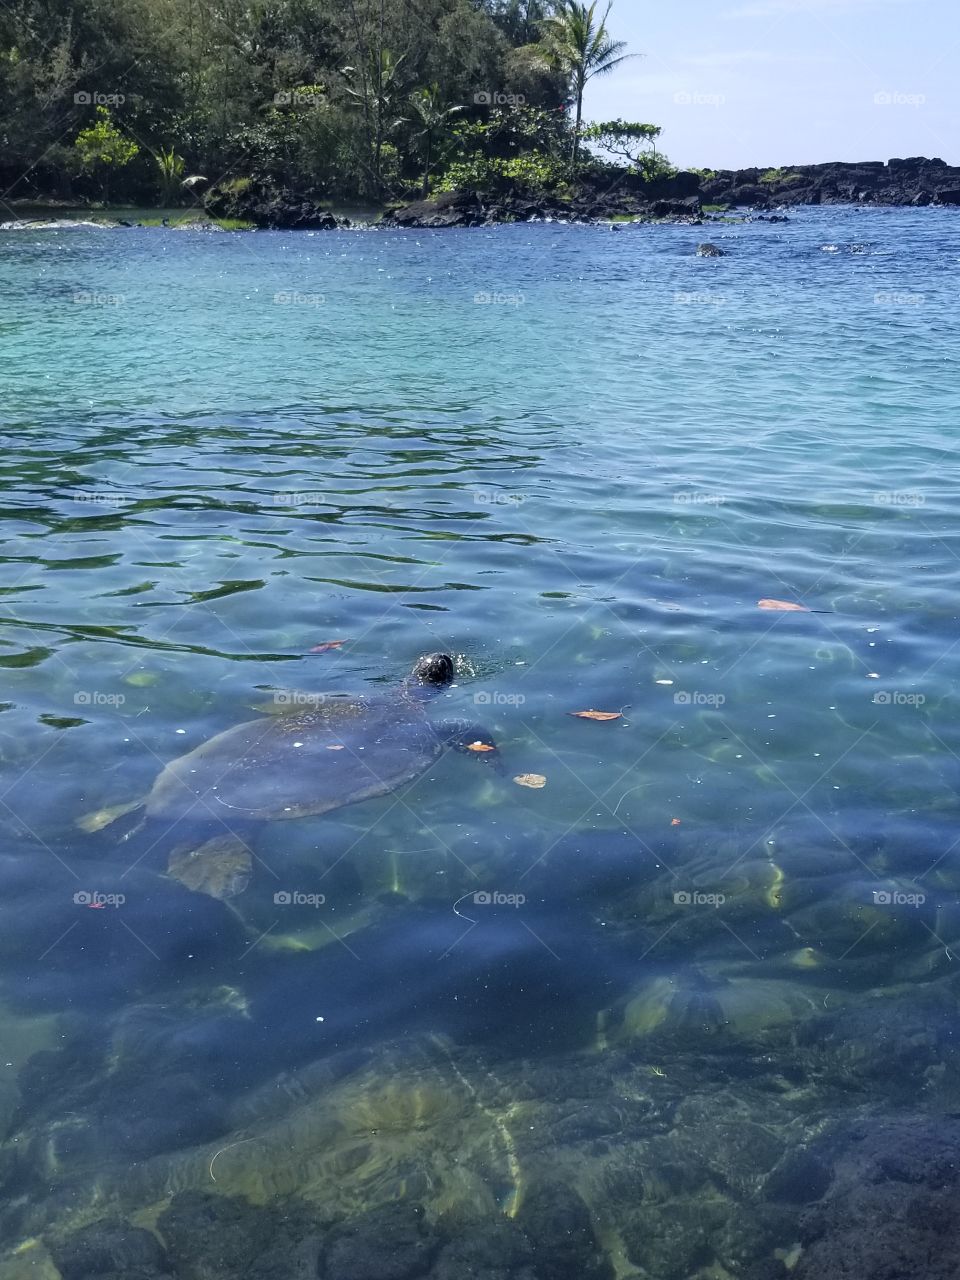 Turtle during high tide swimming with so much grace and gratitude.  this is my garden of eden. thank you